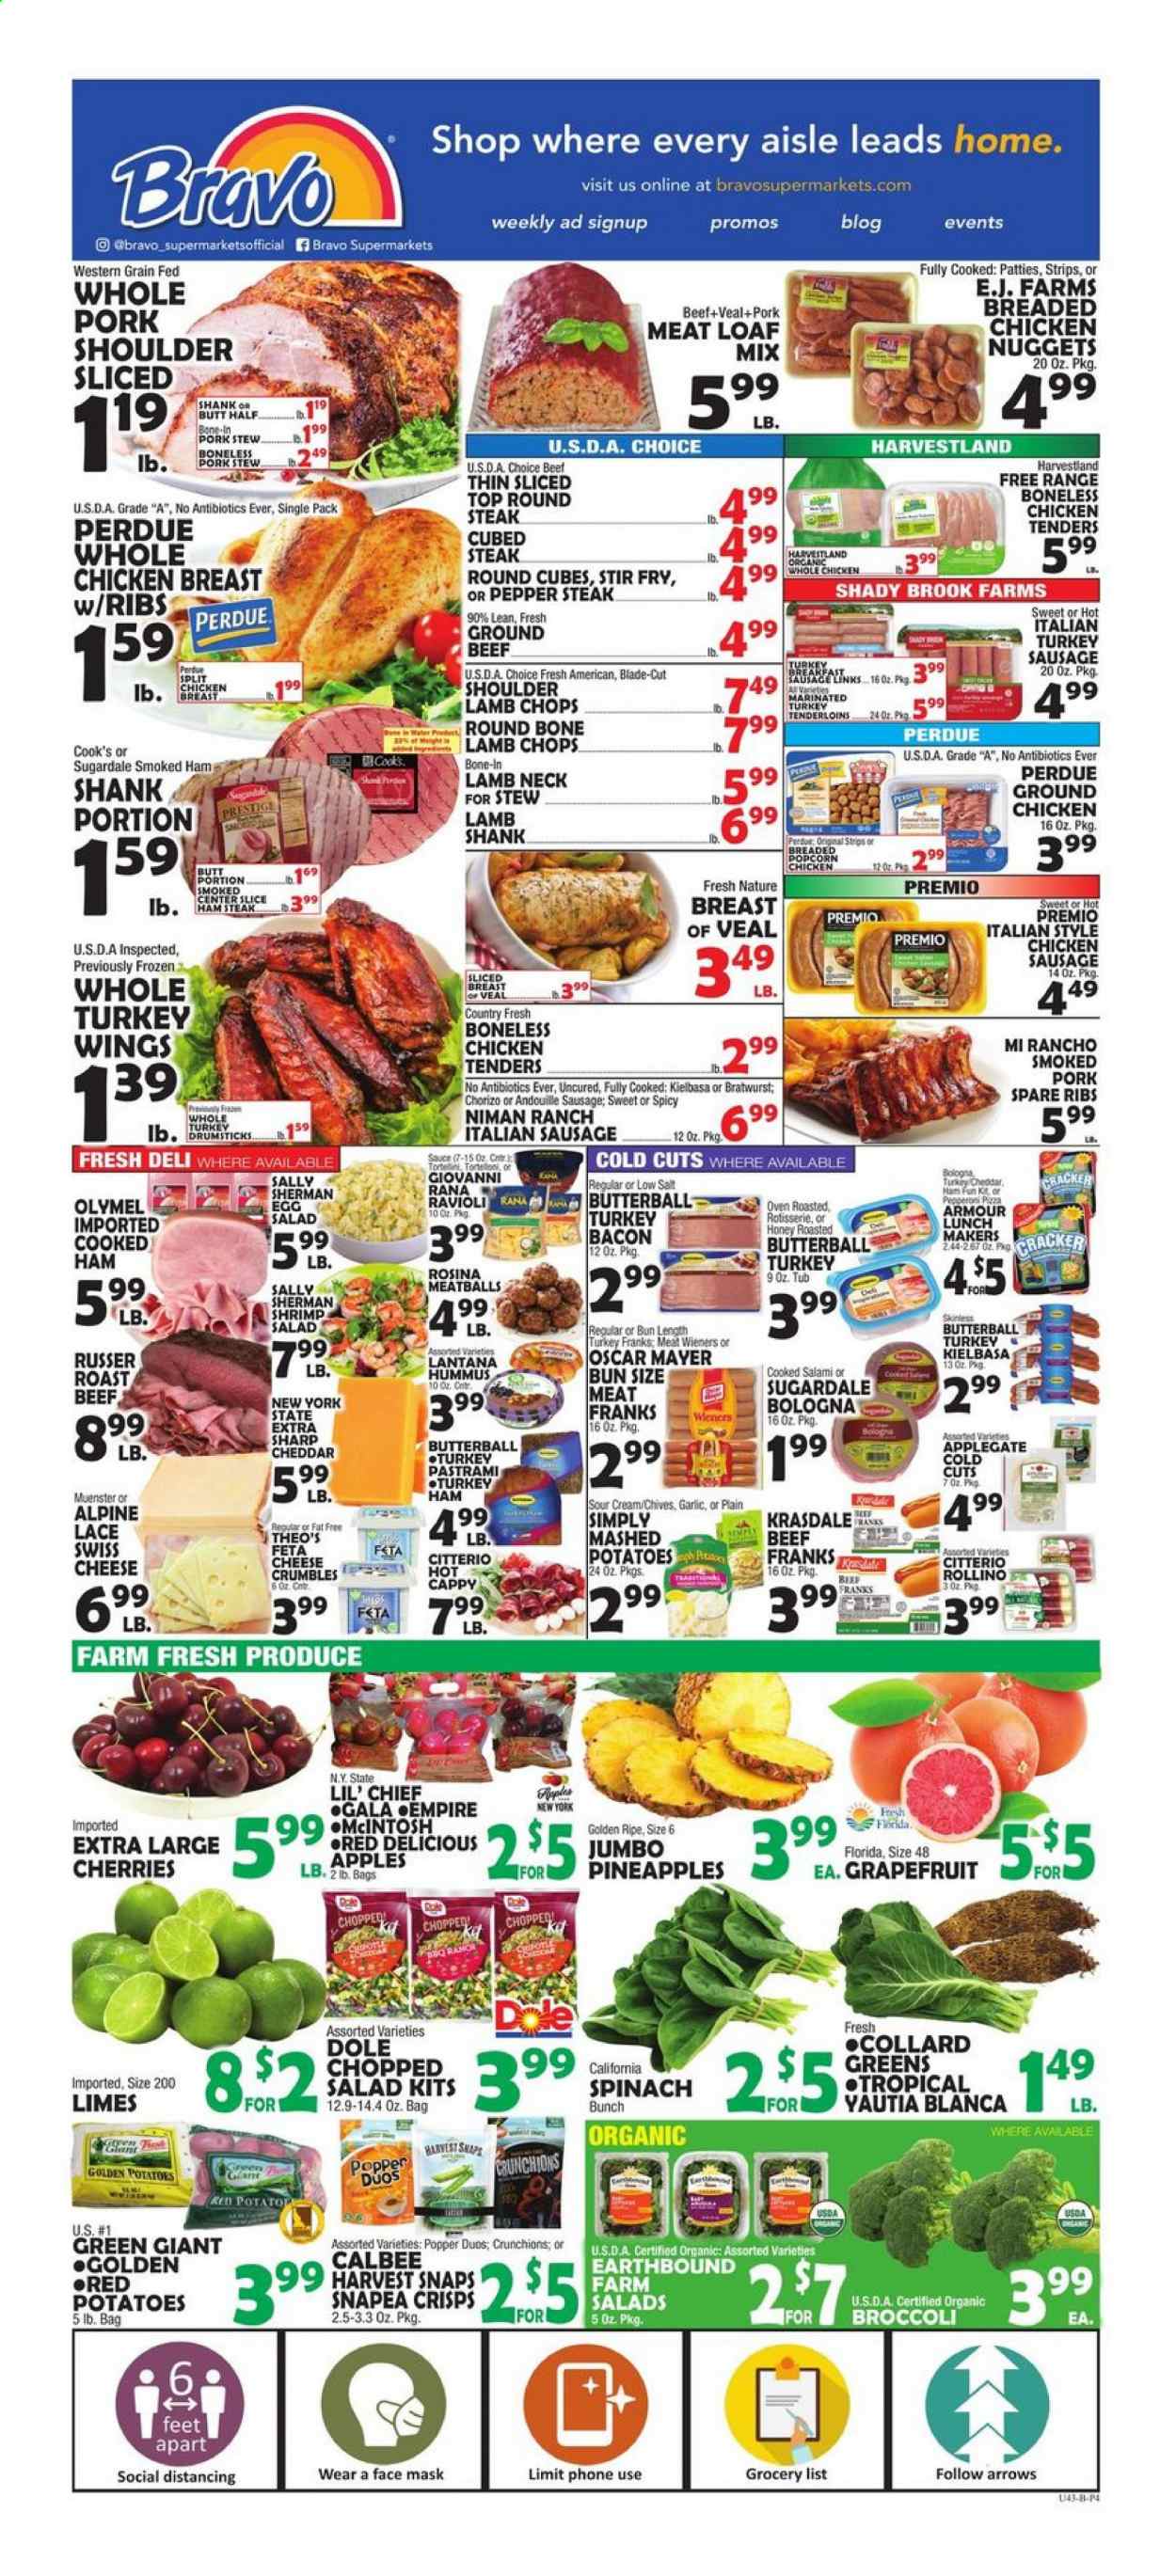 thumbnail - Bravo Supermarkets Flyer - 01/22/2021 - 01/28/2021 - Sales products - collard greens, Dole, apples, shrimps, meatballs, nuggets, salad, sauce, fried chicken, chicken nuggets, Giovanni Rana, Perdue®, bacon, cooked ham, salami, turkey bacon, ham, ham shank, ham steaks, chorizo, smoked ham, bologna sausage, Oscar Mayer, bratwurst, sausage, pepperoni, chicken sausage, italian sausage, hummus, swiss cheese, cheddar, cheese, Münster cheese, feta, cheese crumbles, eggs, sour cream, spinach, strips, crackers, popcorn, Harvest Snaps, garlic, ravioli, Rana, honey, Cook's, Butterball, ground chicken, whole chicken, whole turkey, chicken breasts, chicken tenders, turkey wings, beef meat, ground beef, pastrami, steak, round steak, roast beef, pork meat, pork shoulder, pork spare ribs, lamb chops, lamb meat, lamb shank, limes, Red Delicious apples, pineapple, cherries. Page 4.